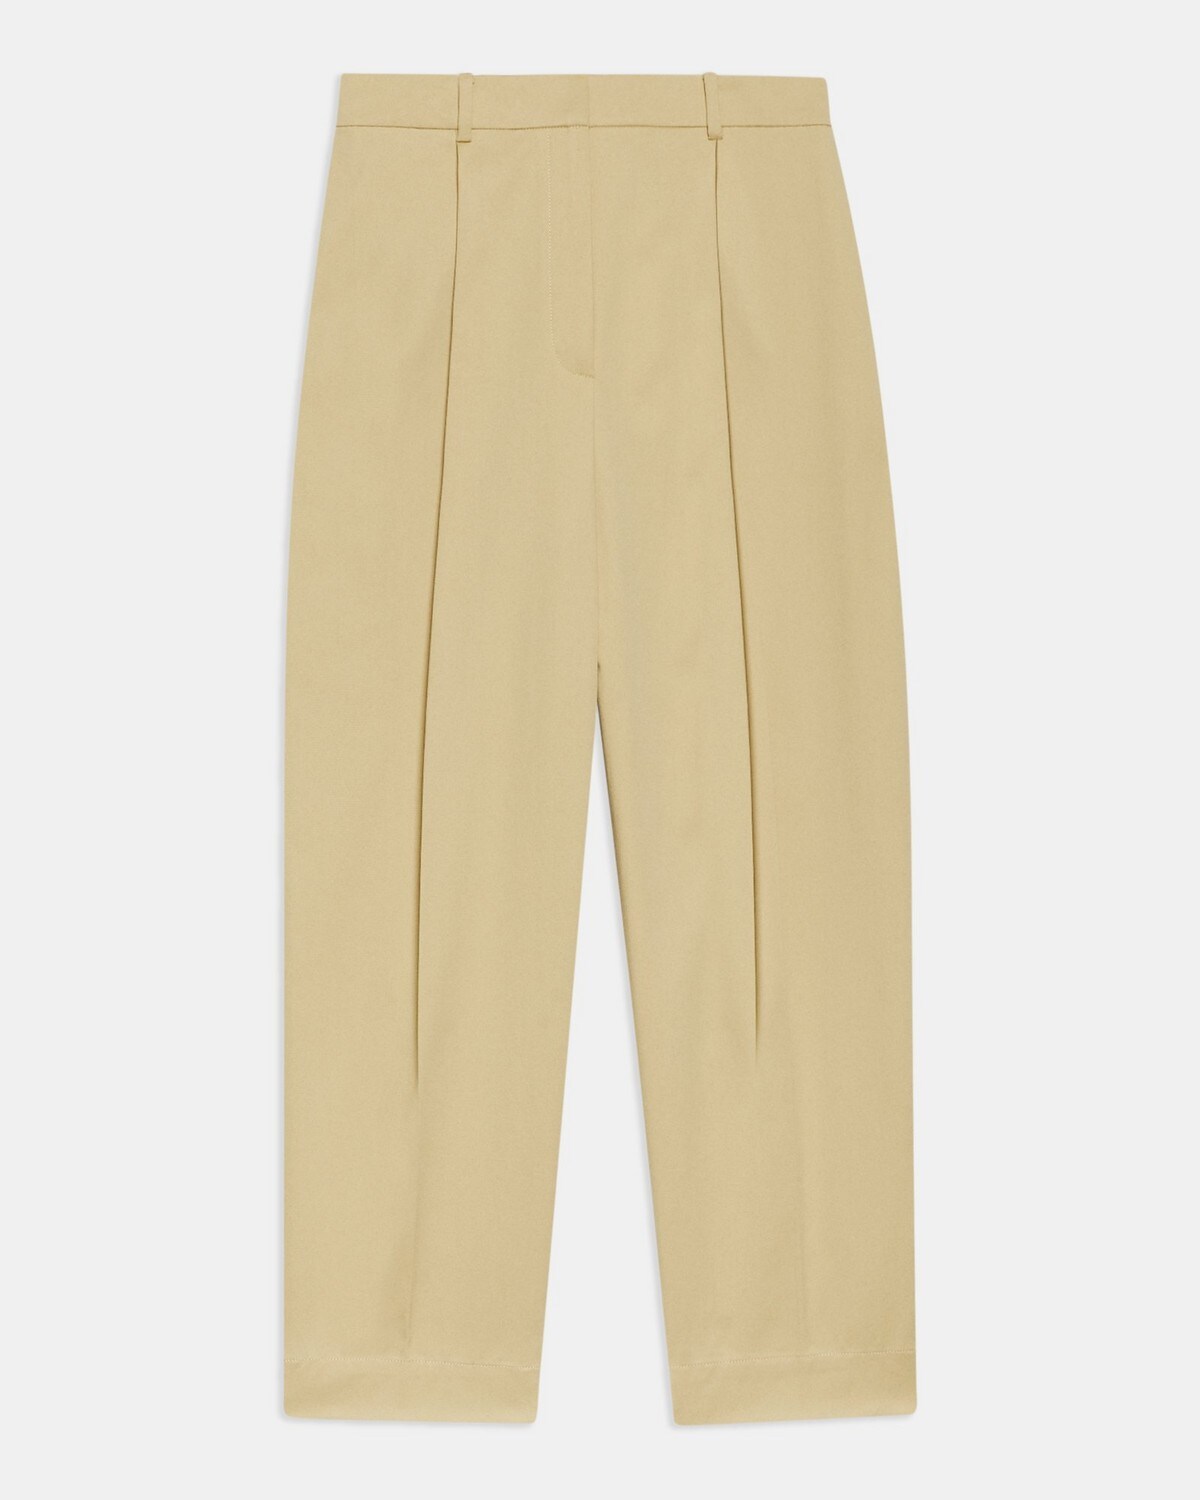 Pleated Carrot Pant in Stretch Cotton Twill